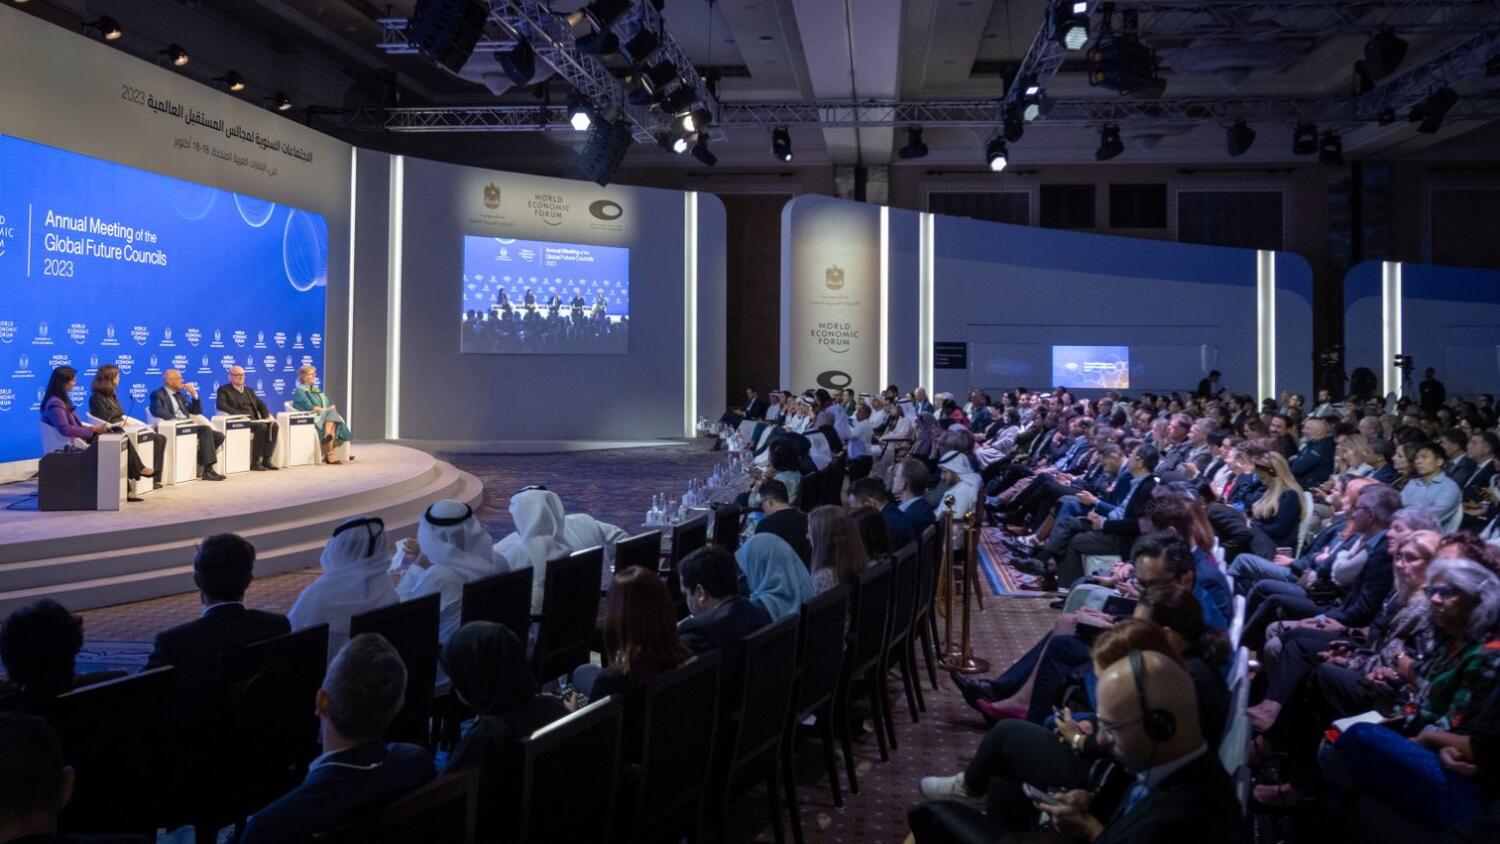 Attendees at the opening plenary session of the Global Future Councils in Dubai. — Wam